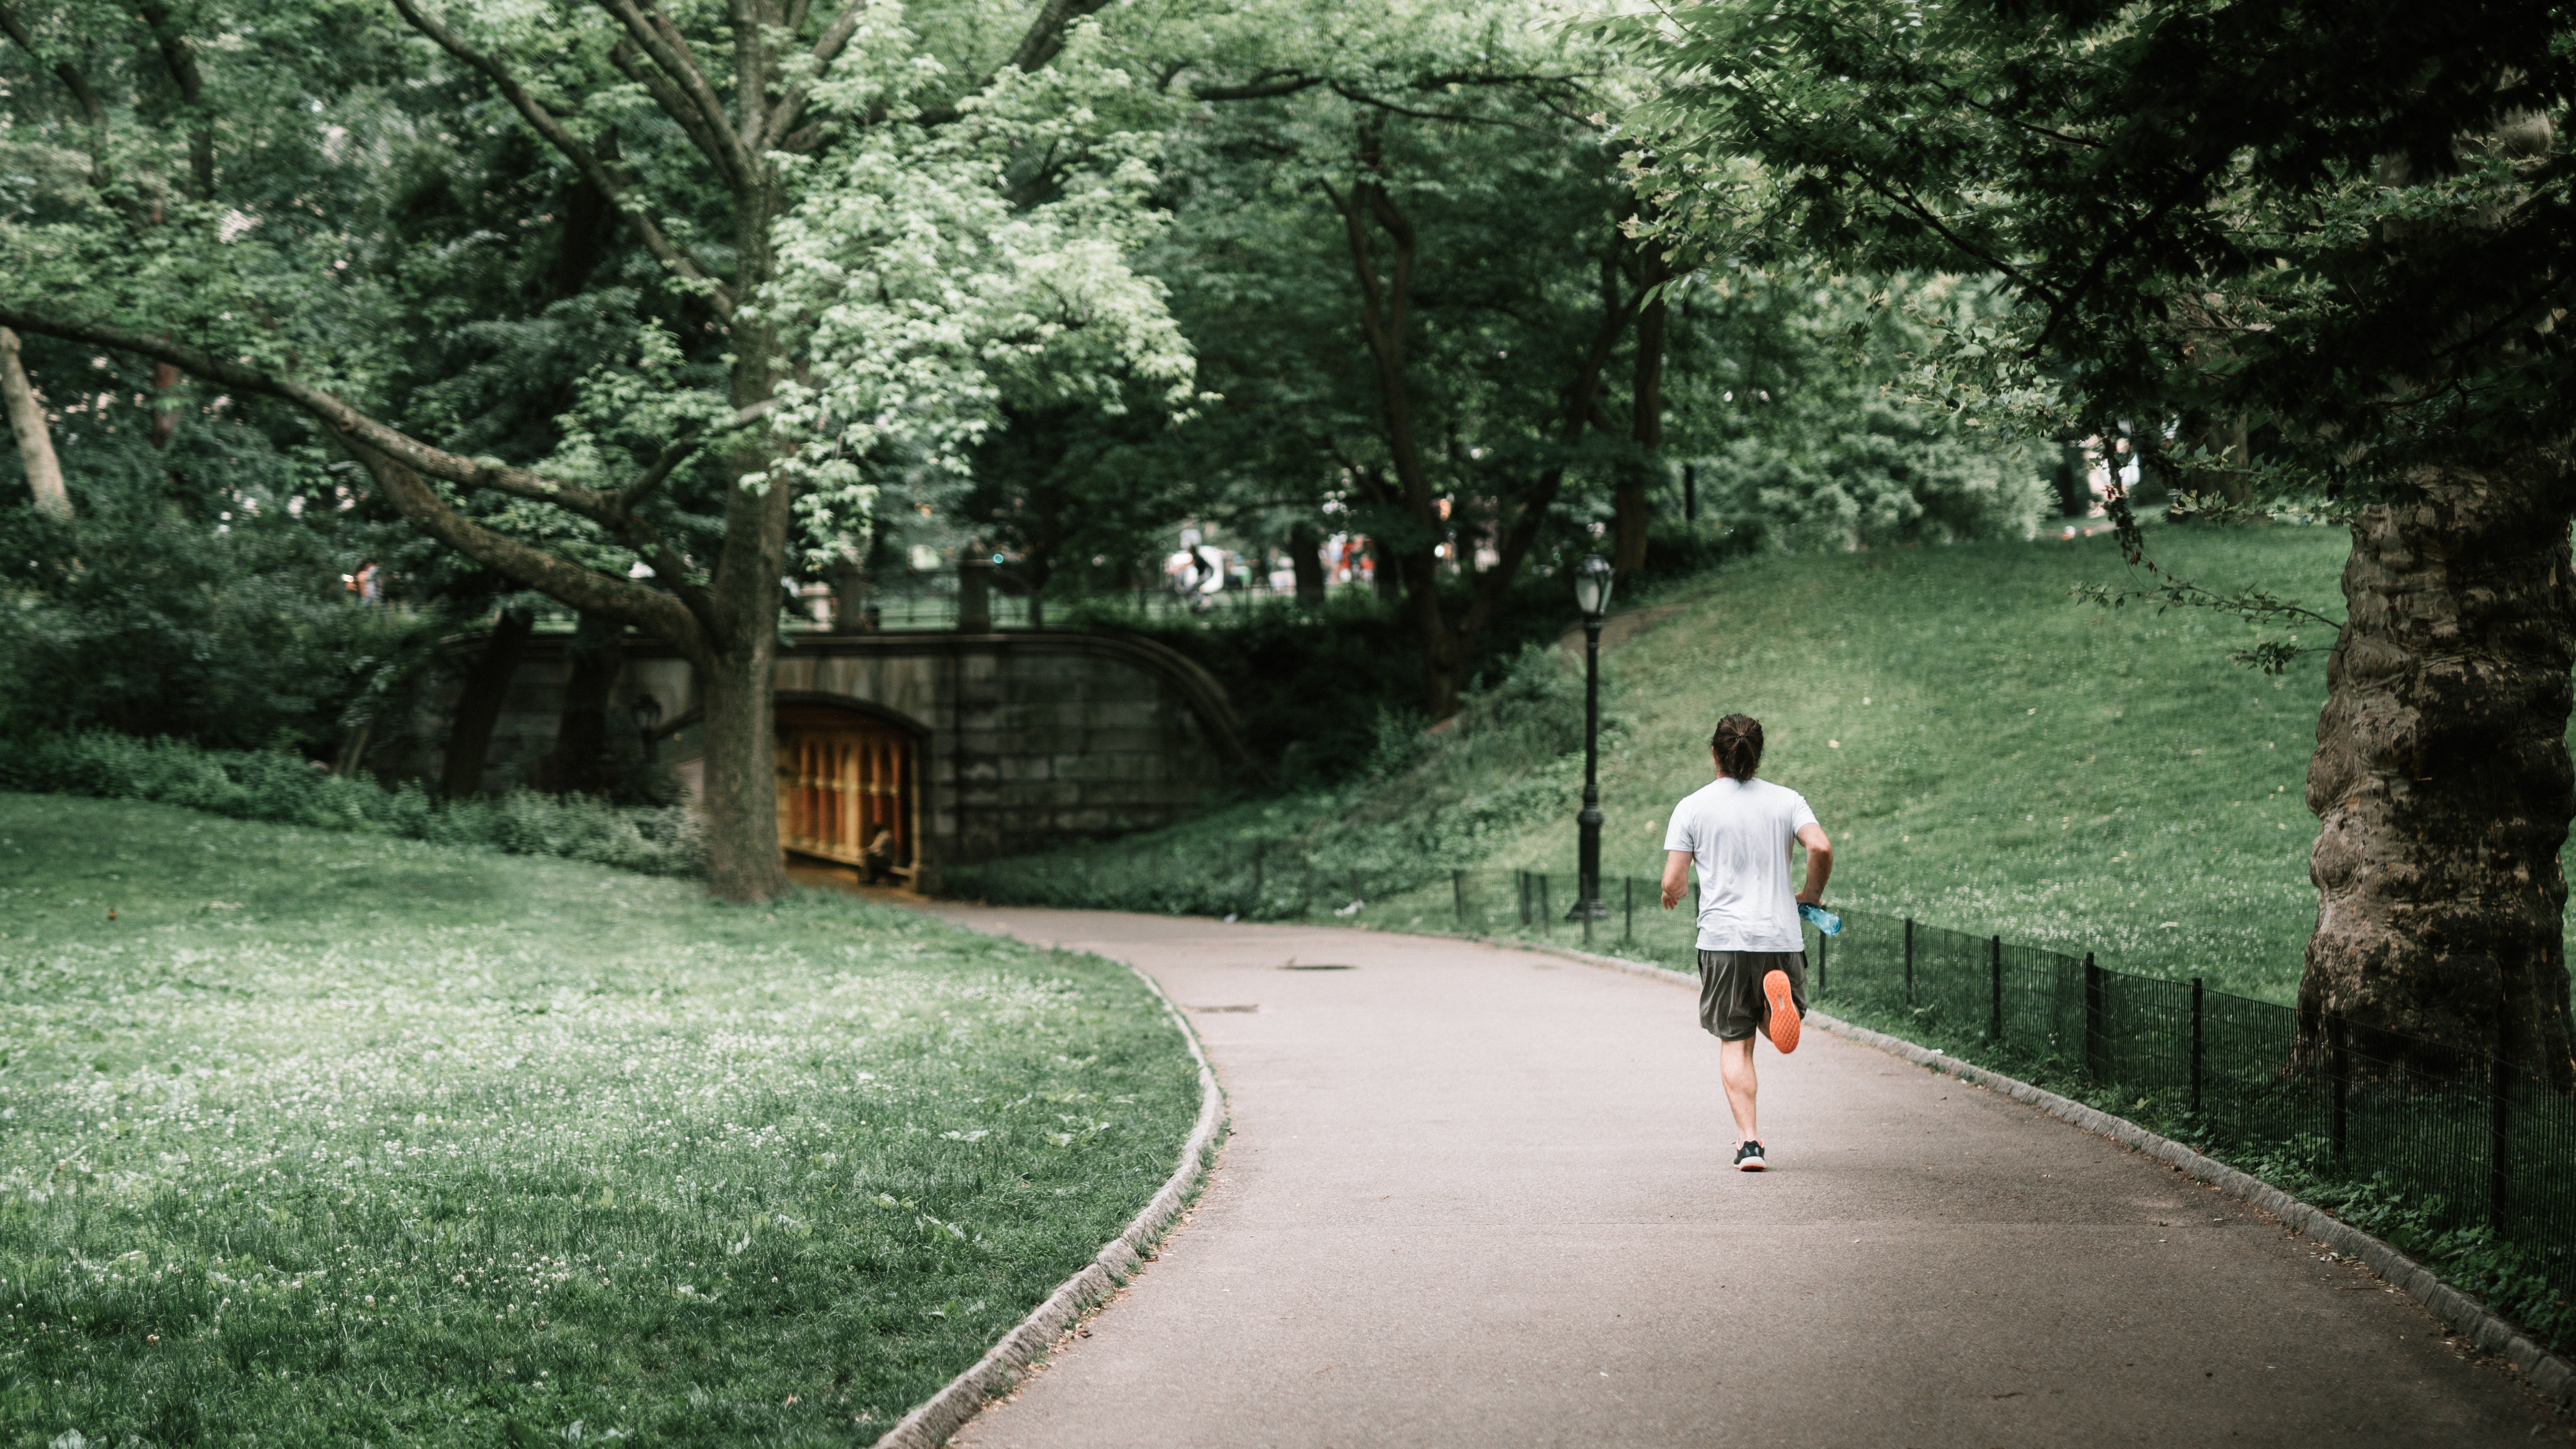 Bruce would notice the same old woman sitting in the park while he jogged everyday. | Source: Pexels